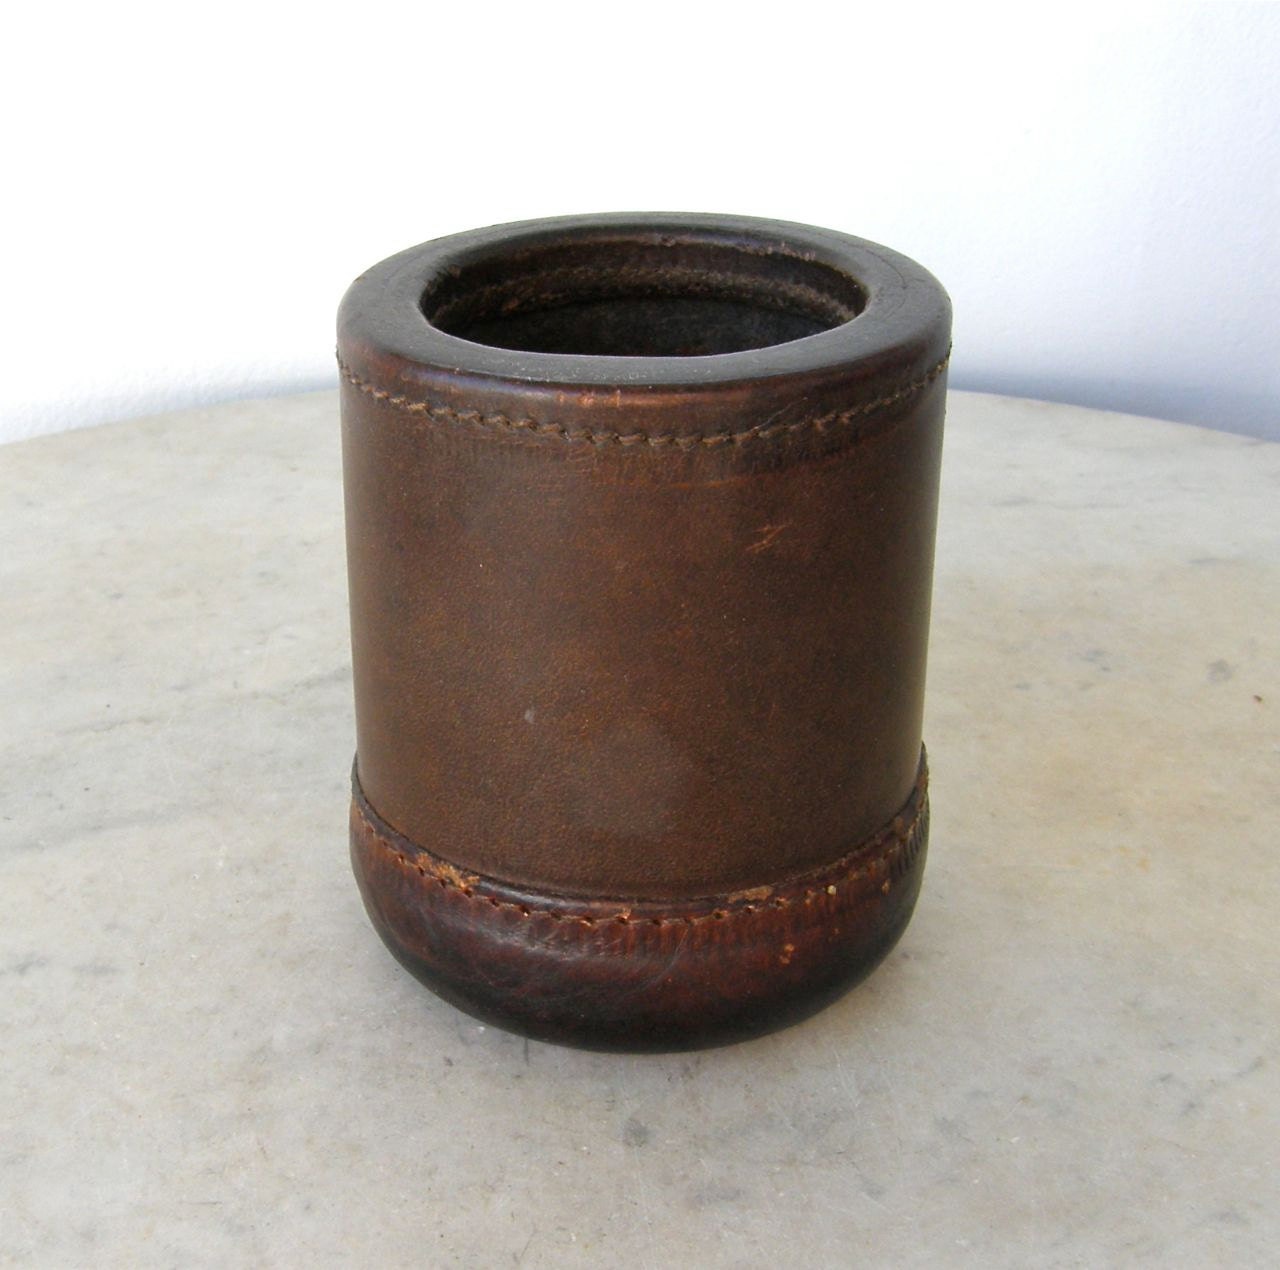 LIARS Patina Leather CUP  DICE dice Brown All Interior cups   Great vintage Fabulous